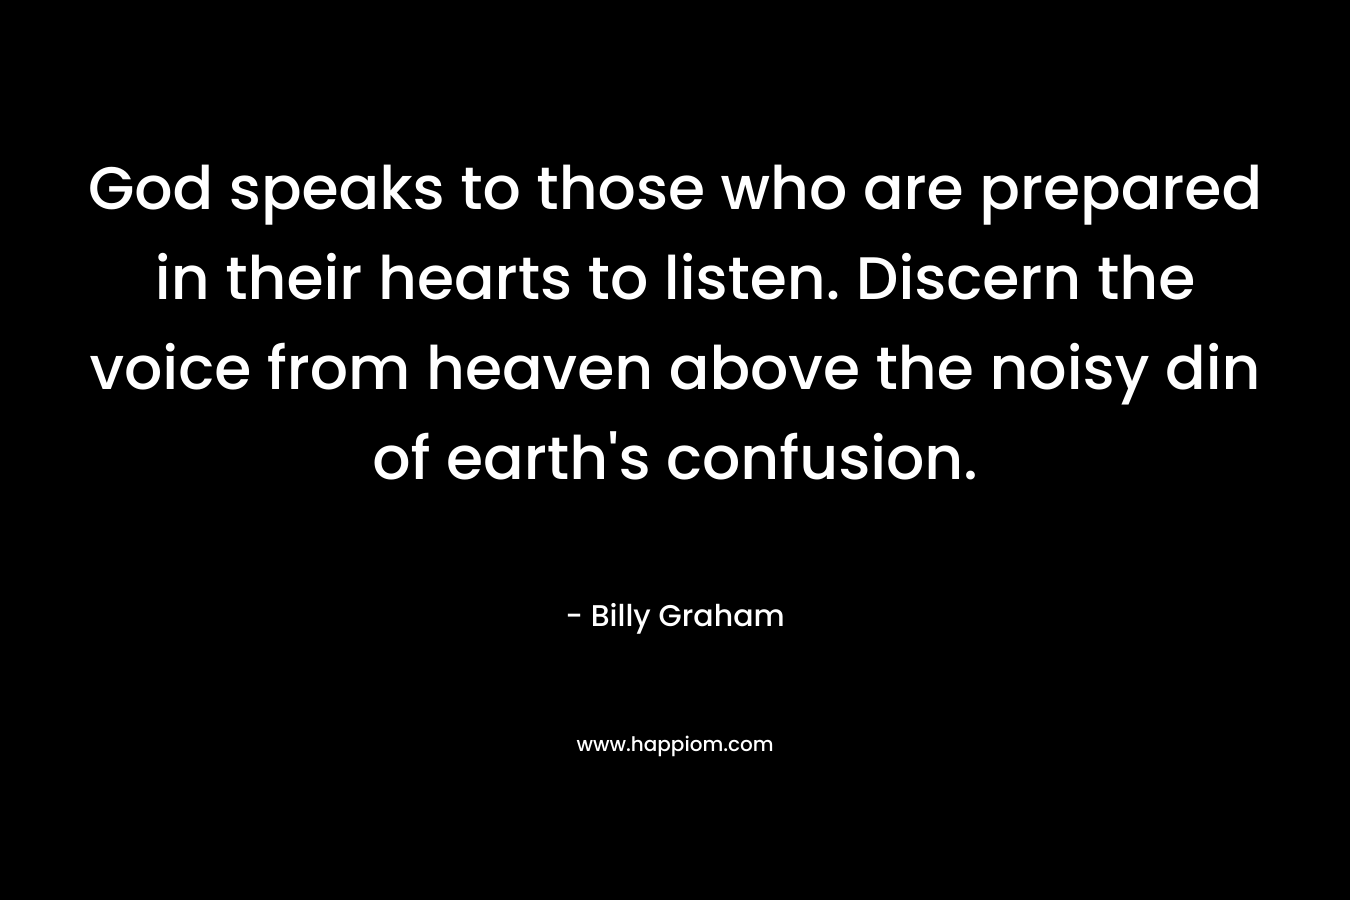 God speaks to those who are prepared in their hearts to listen. Discern the voice from heaven above the noisy din of earth’s confusion. – Billy Graham